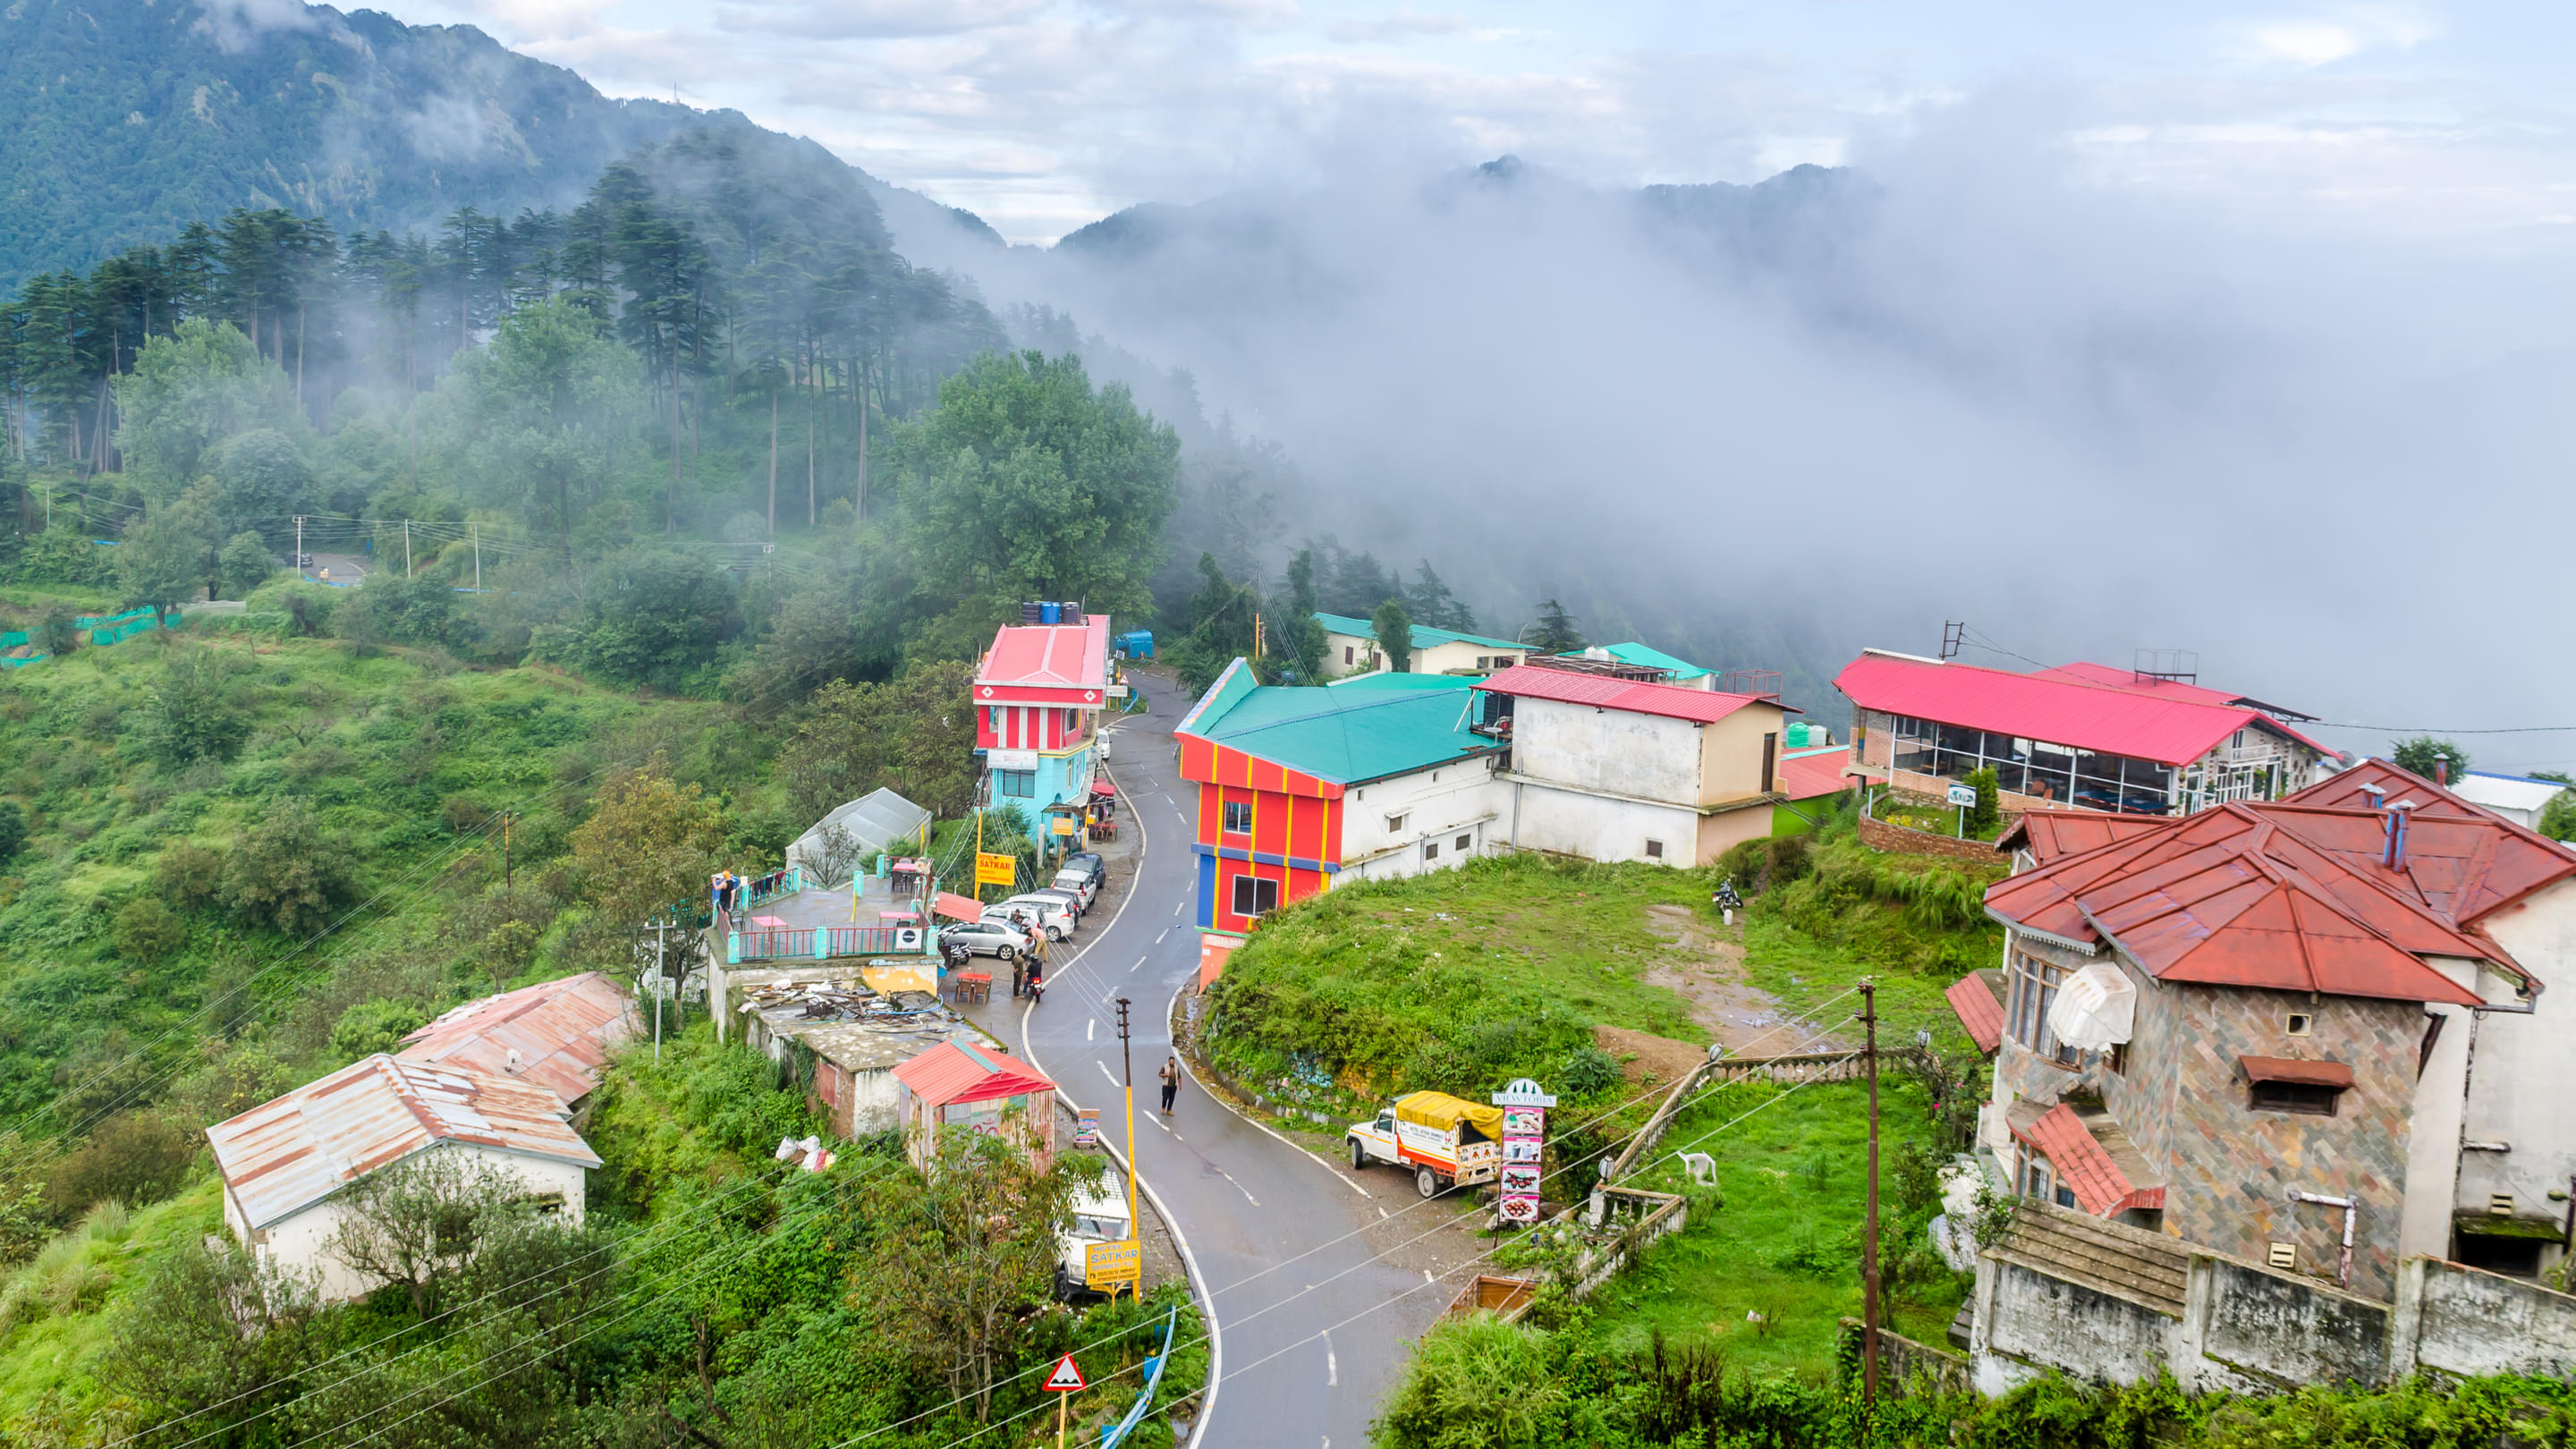 Dhanaulti Packages from Pune | Get Upto 40% Off